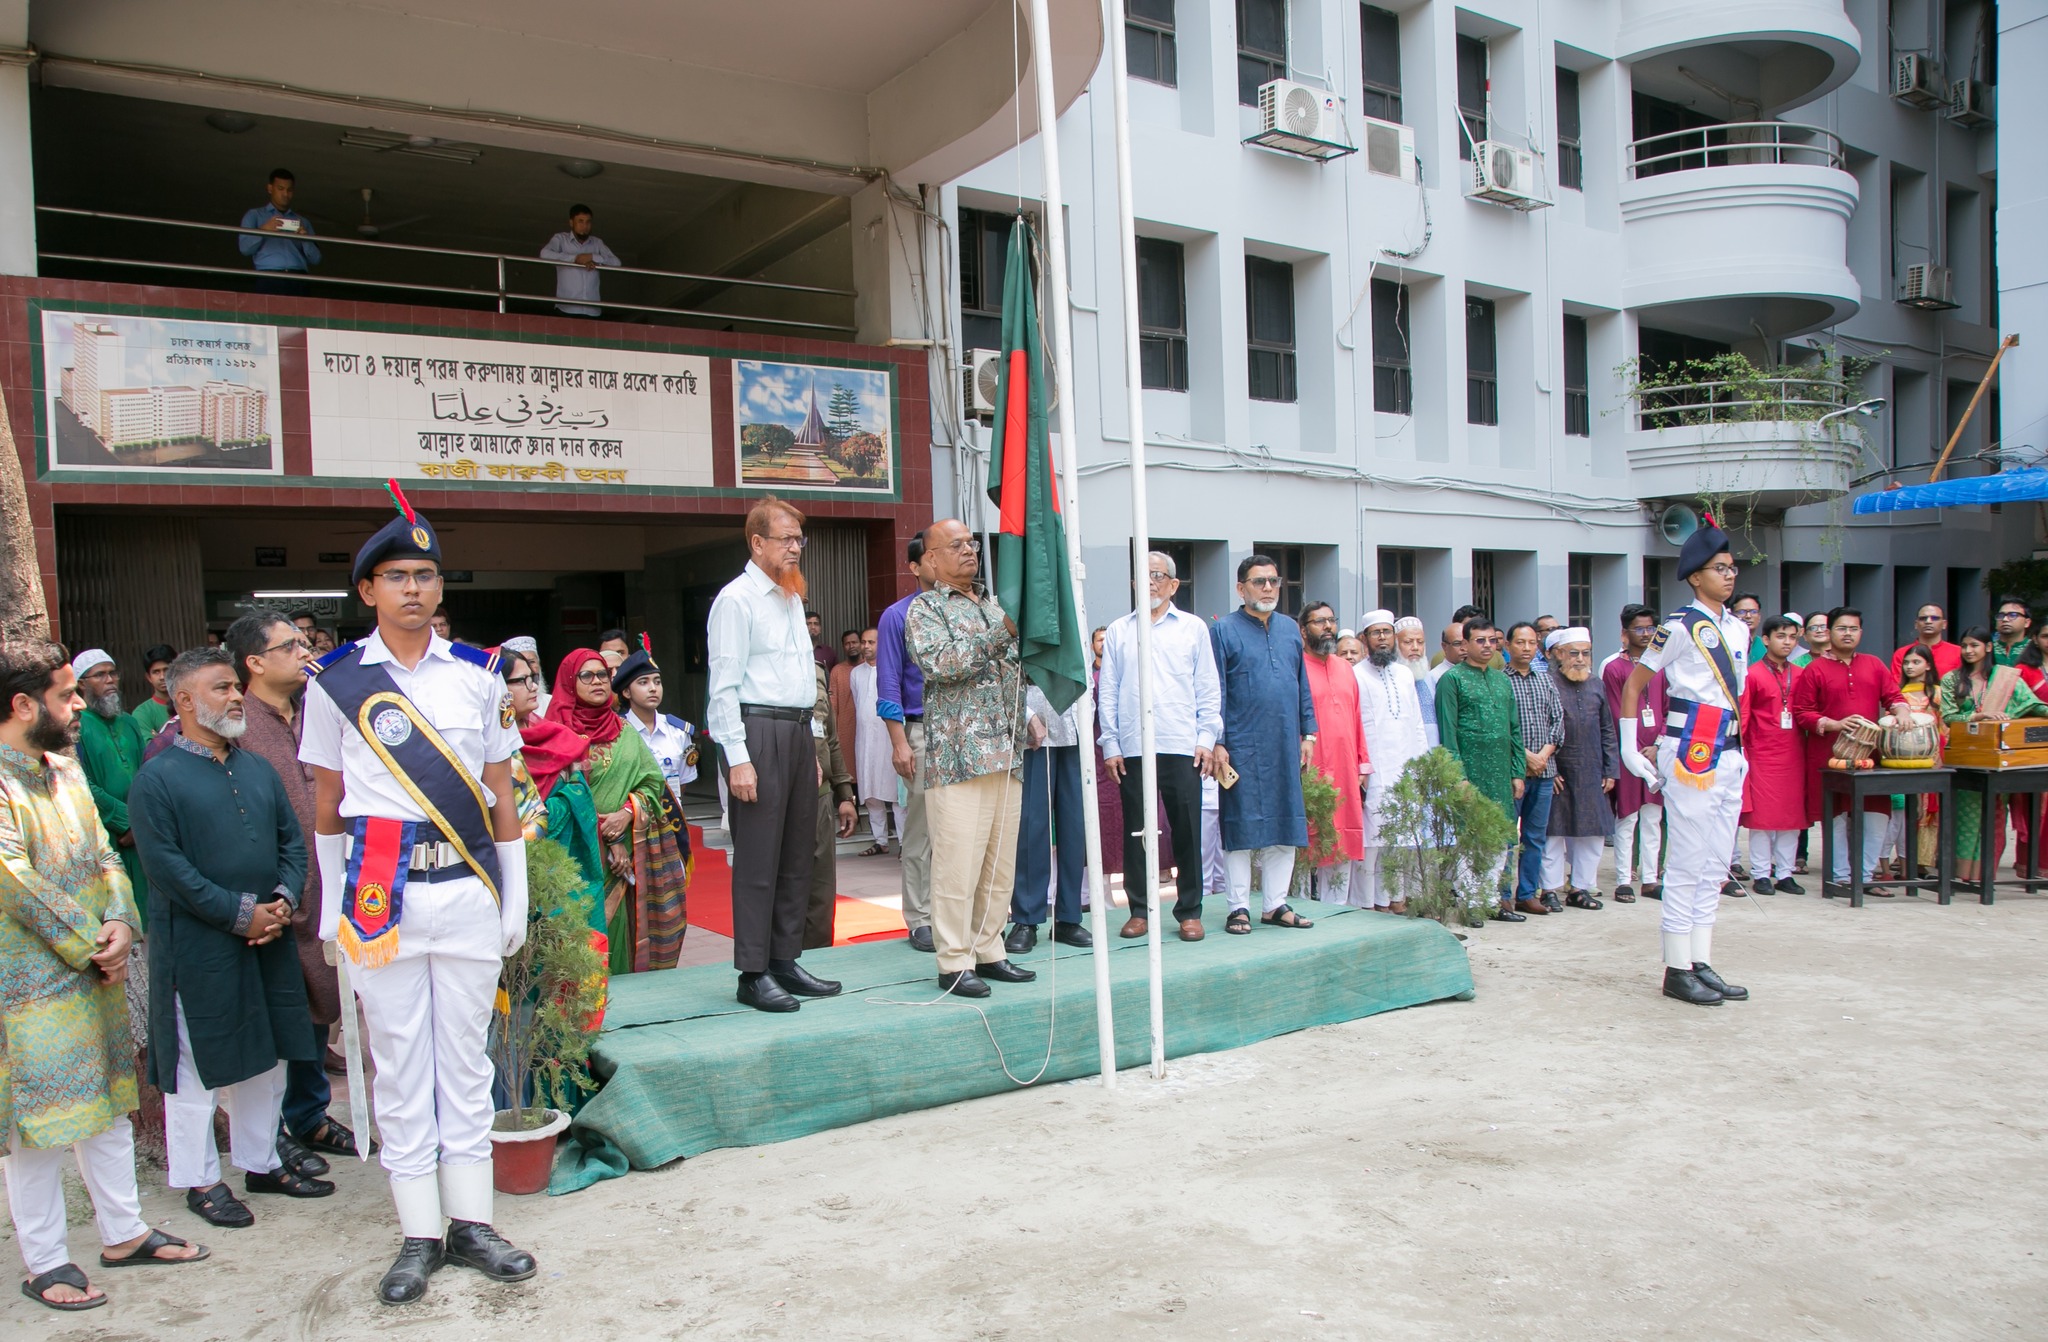 The Independence and National Day Observed at Dhaka Commerce College